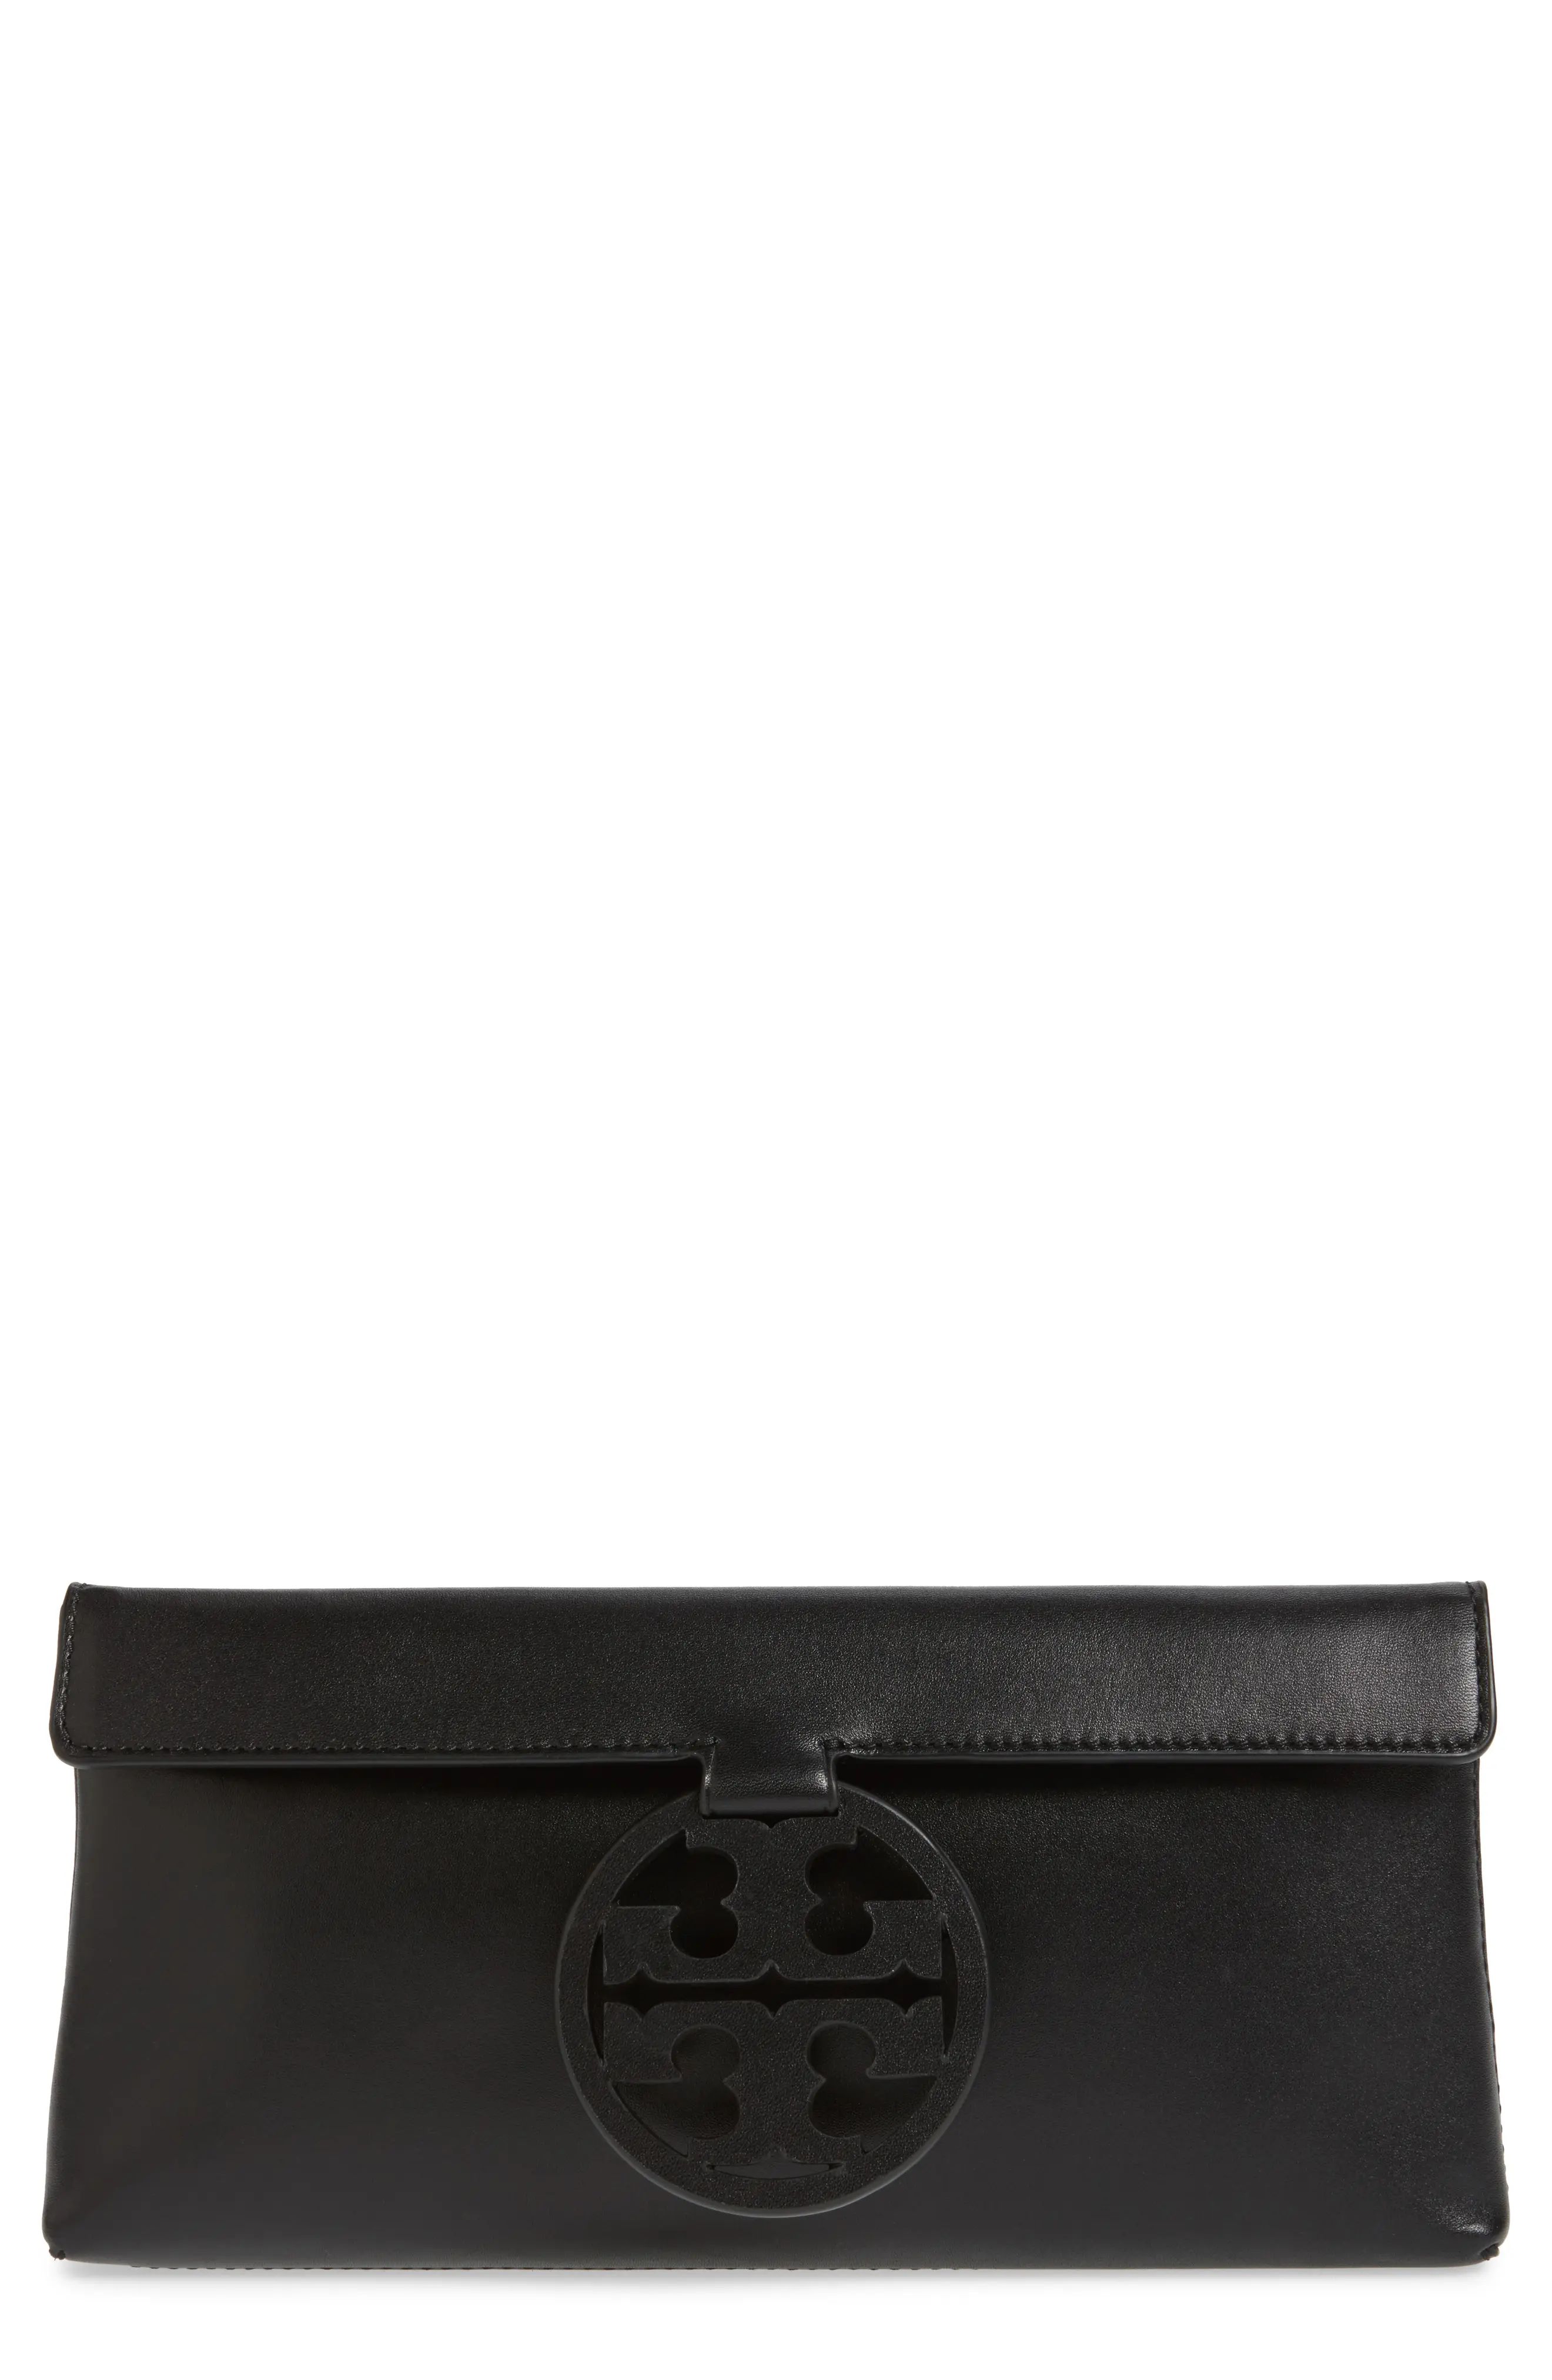 Tory Burch Miller Leather Clutch | Nordstrom